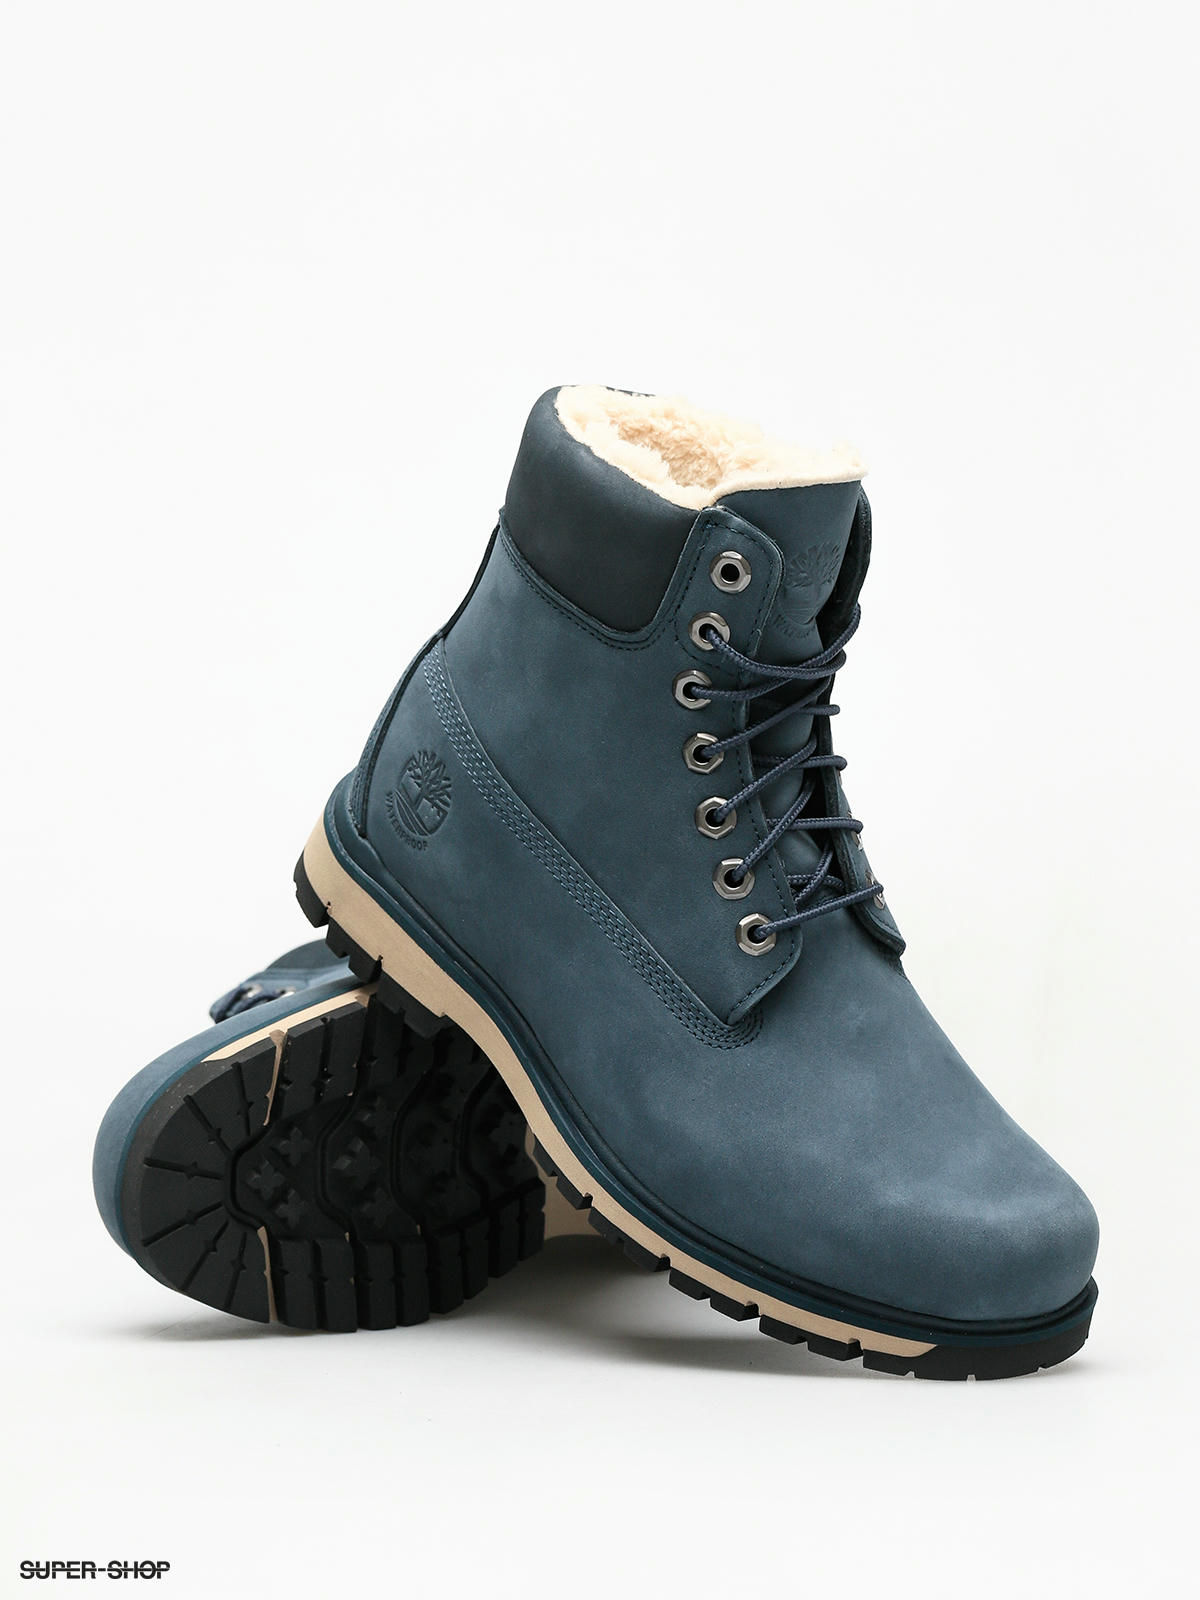 Timberland Radford Lined Boot Wp Winter shoes (patriot blue)